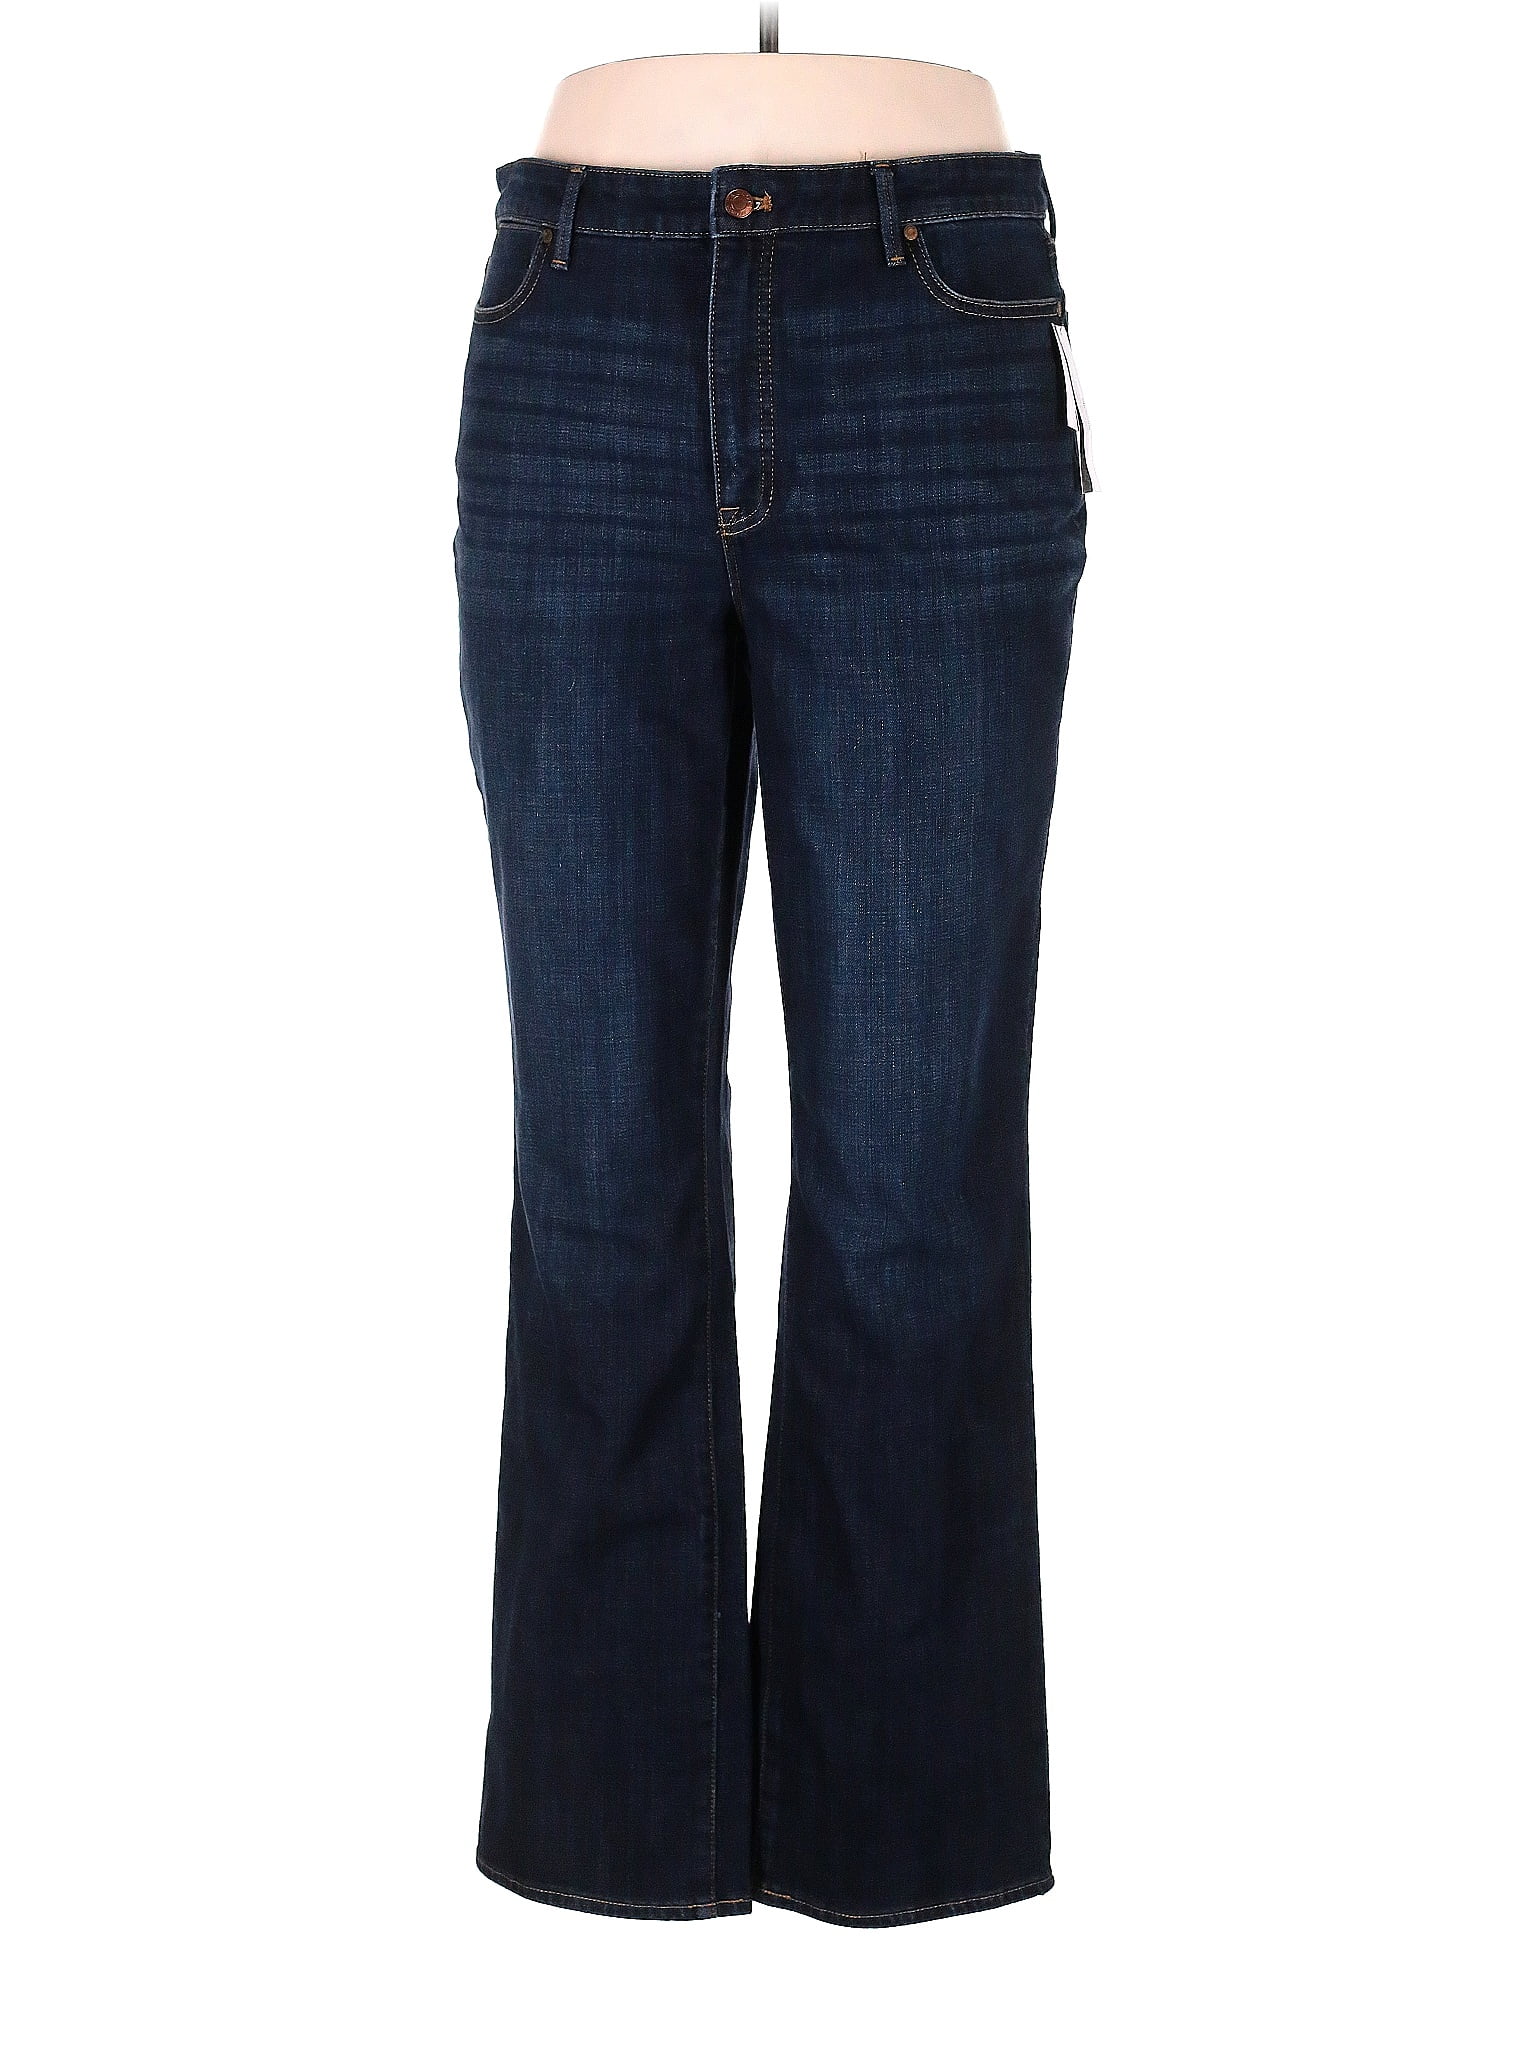 Talbots Solid Blue Jeans Size 14 - 73% off